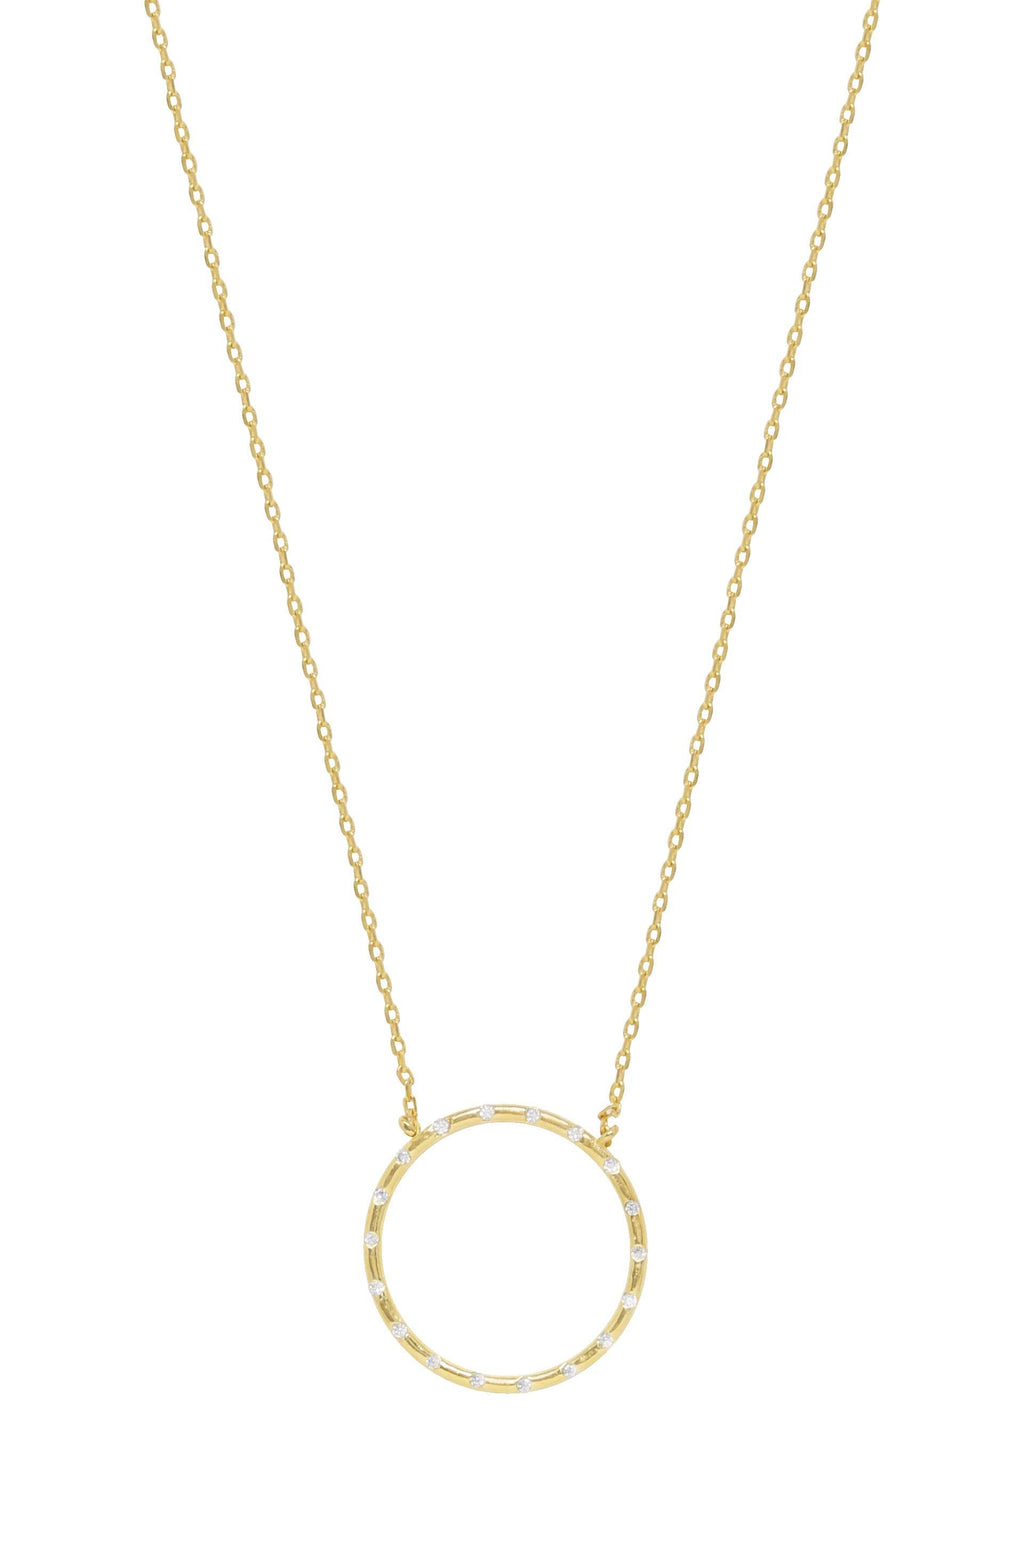 Circle of Love 18k Gold Plated Crystal Pendant Necklace - The Gallant Way